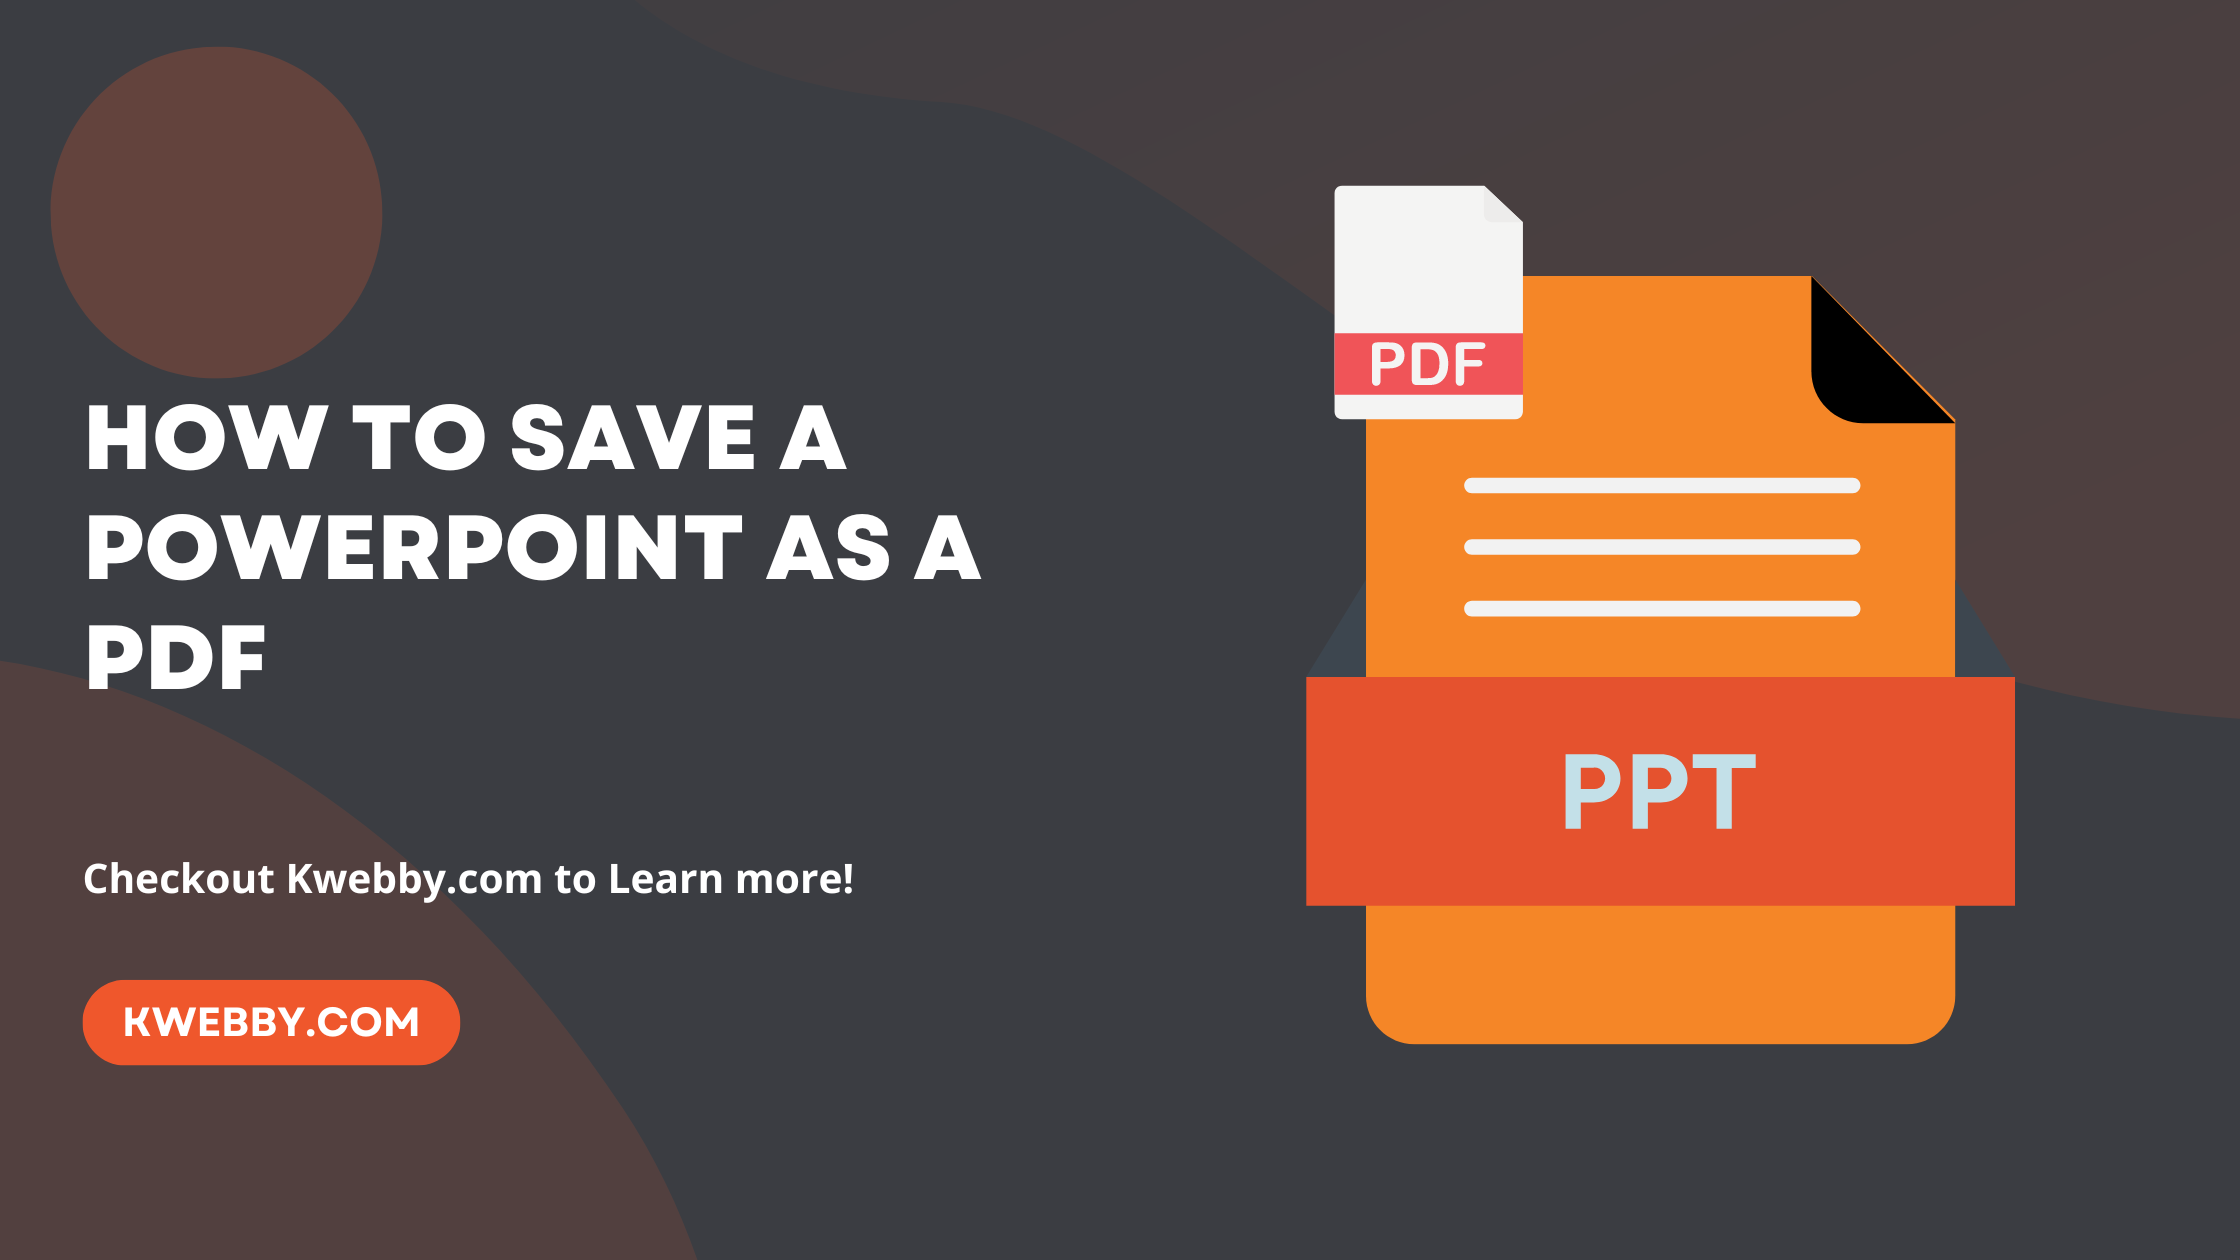 How to save a PowerPoint as a PDF